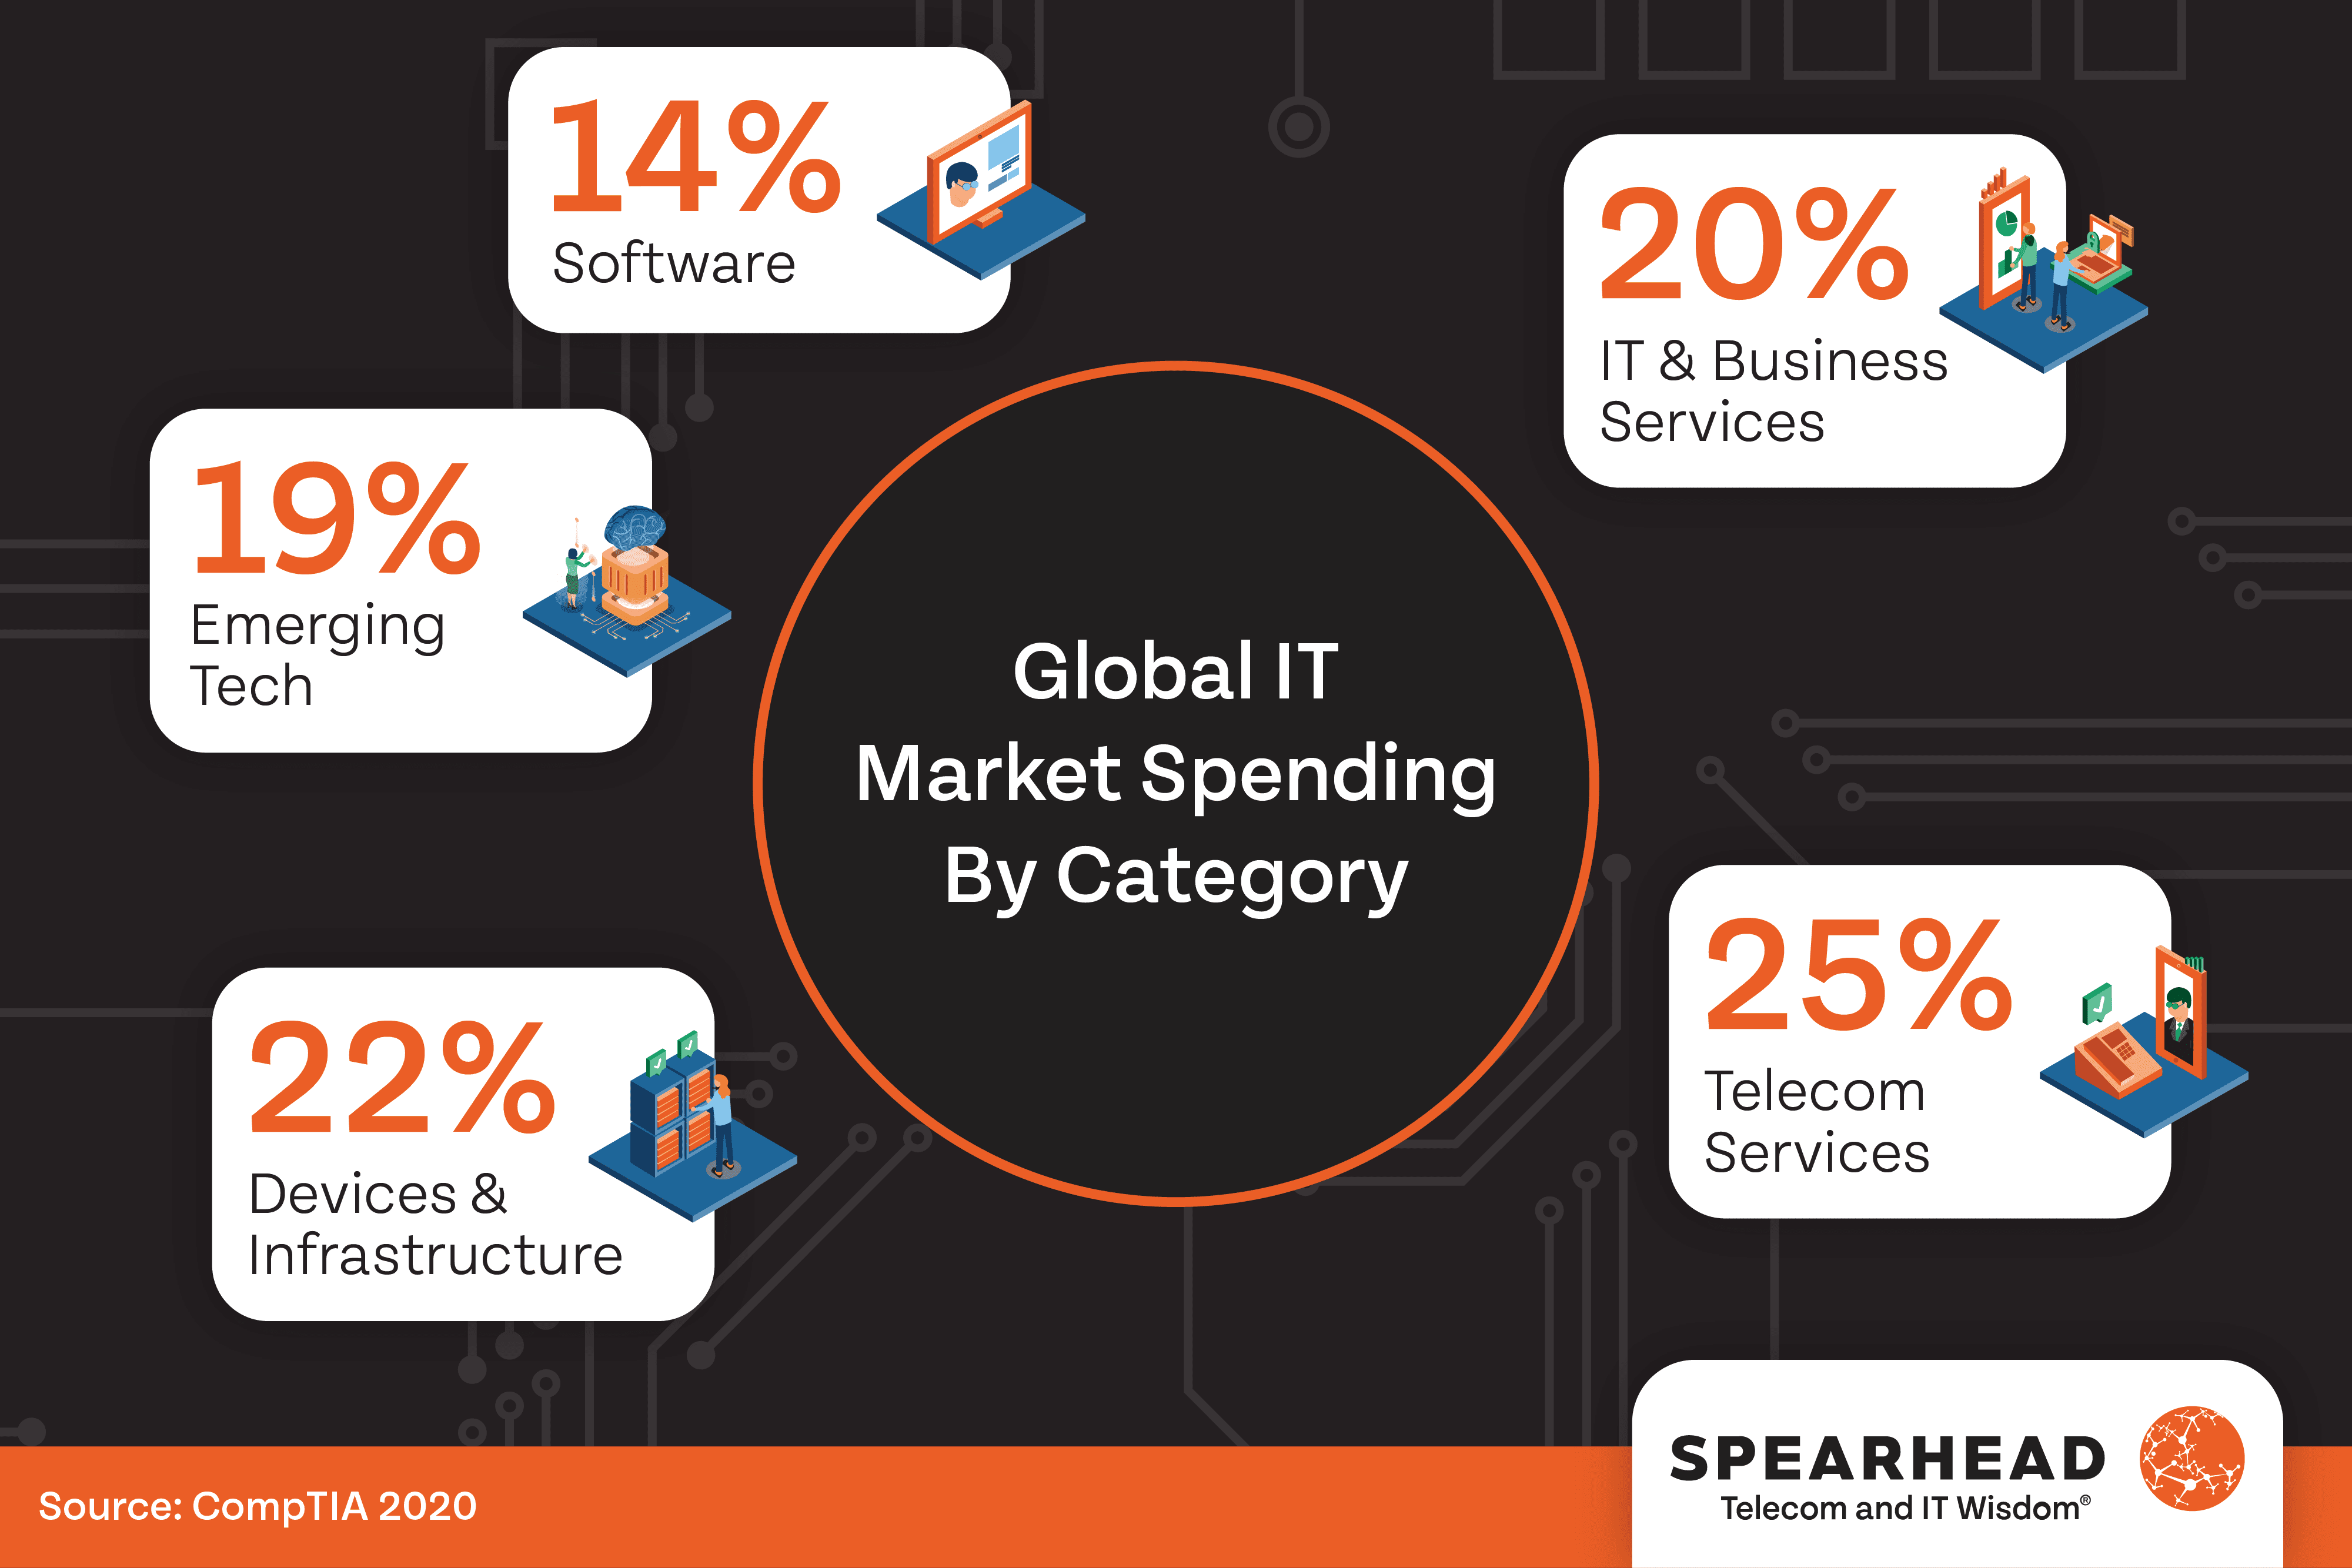 Infographic showing the breakdown of global IT market spending by category